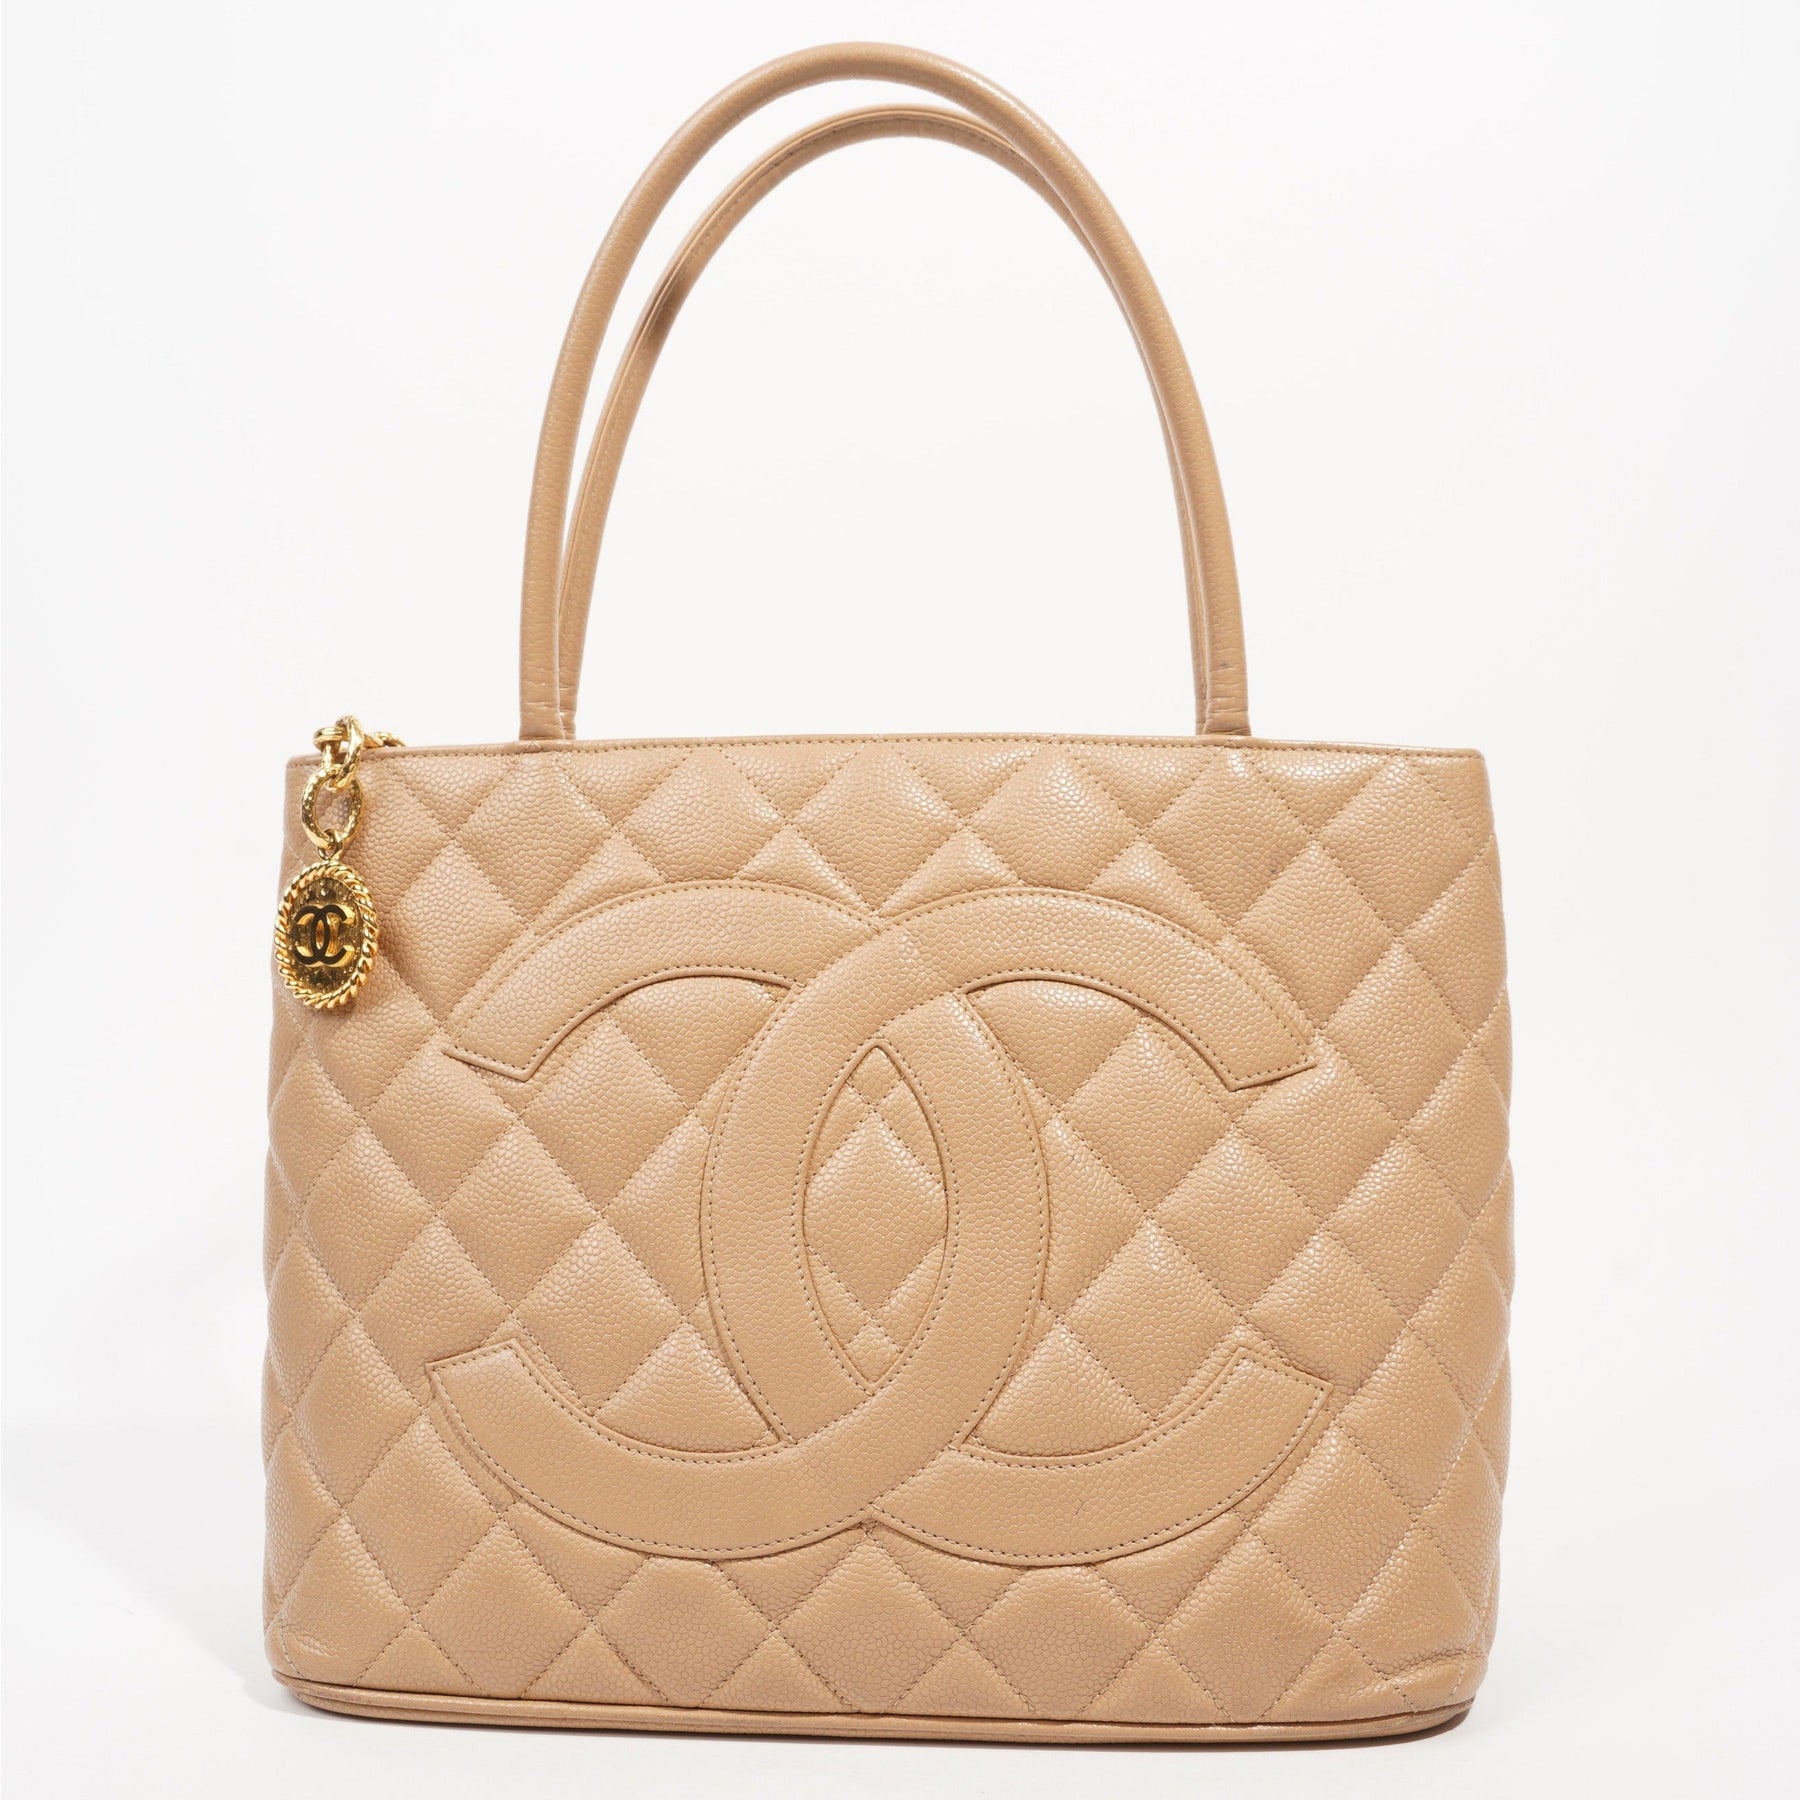 Chanel Grand Shopping Tote Auction